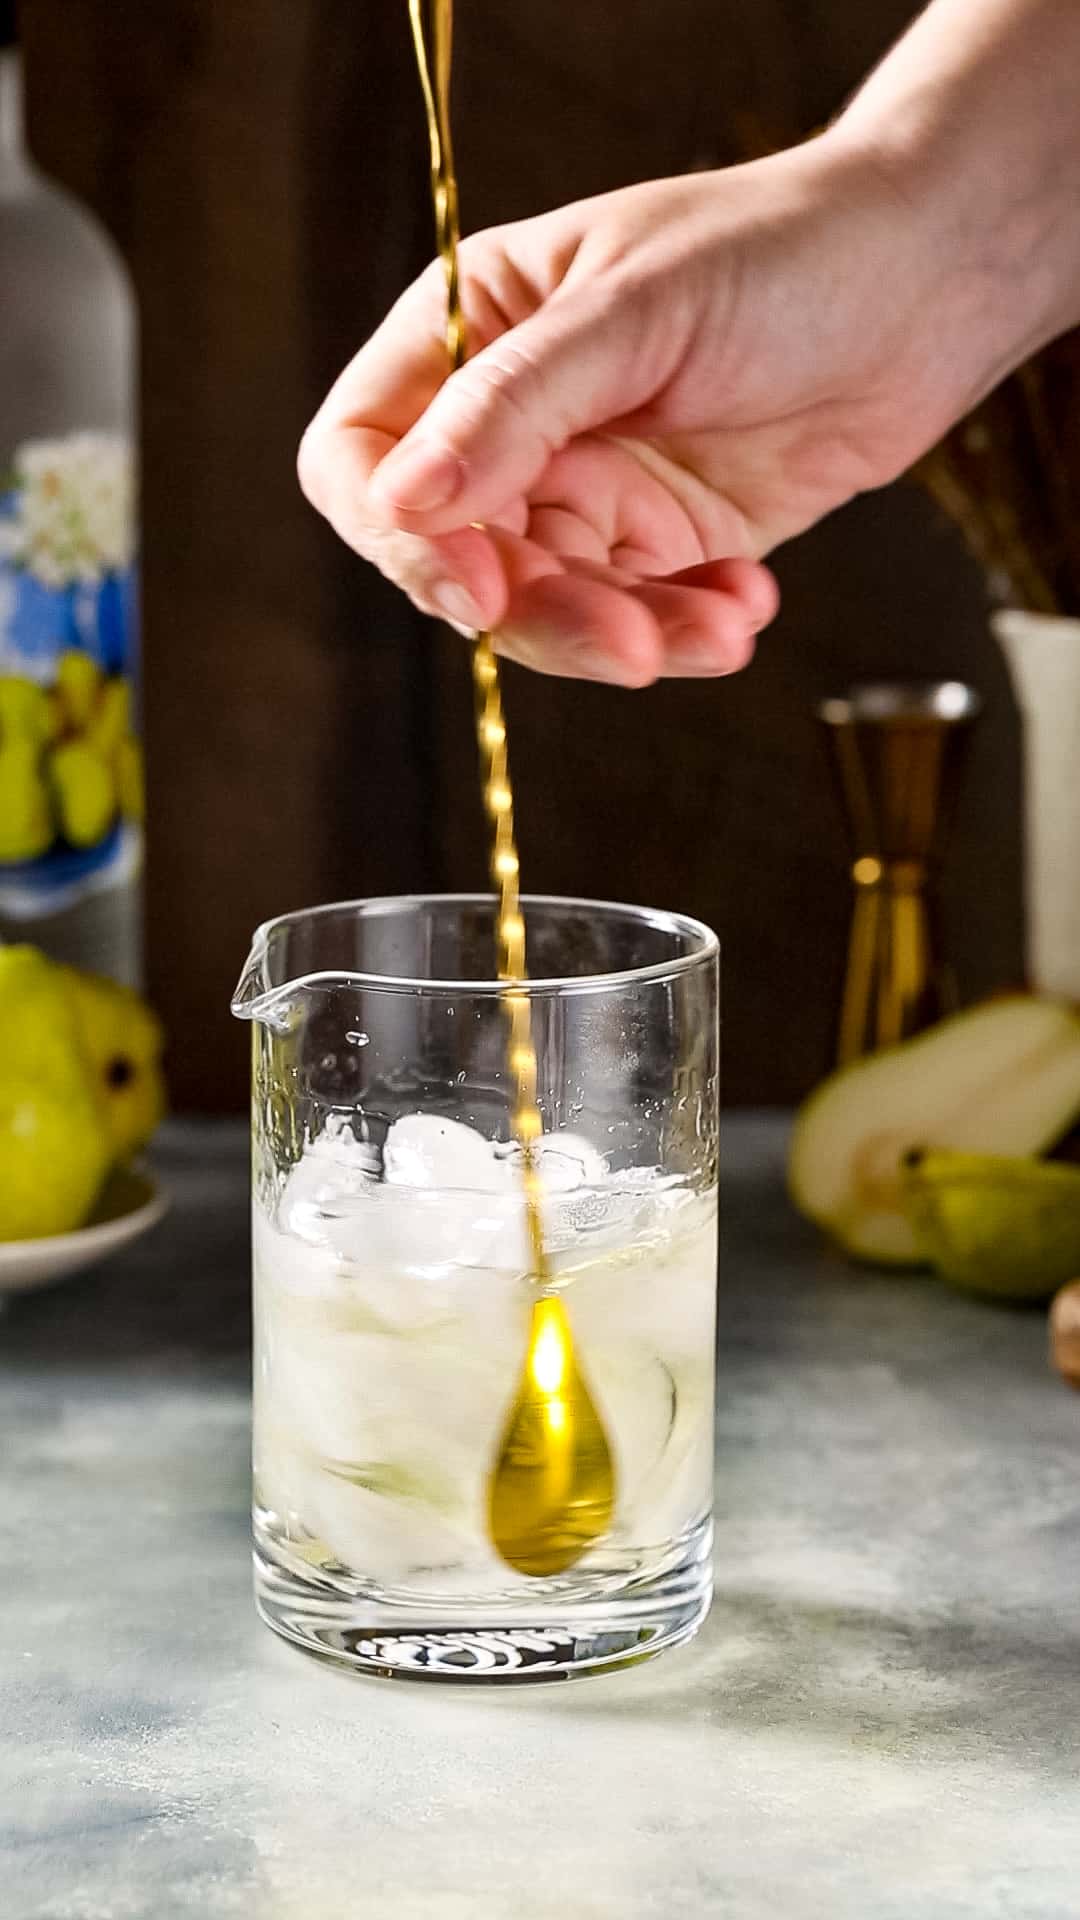 Hand holding a gold bar spoon that is stirring a cocktail along with ice in a mixing glass.